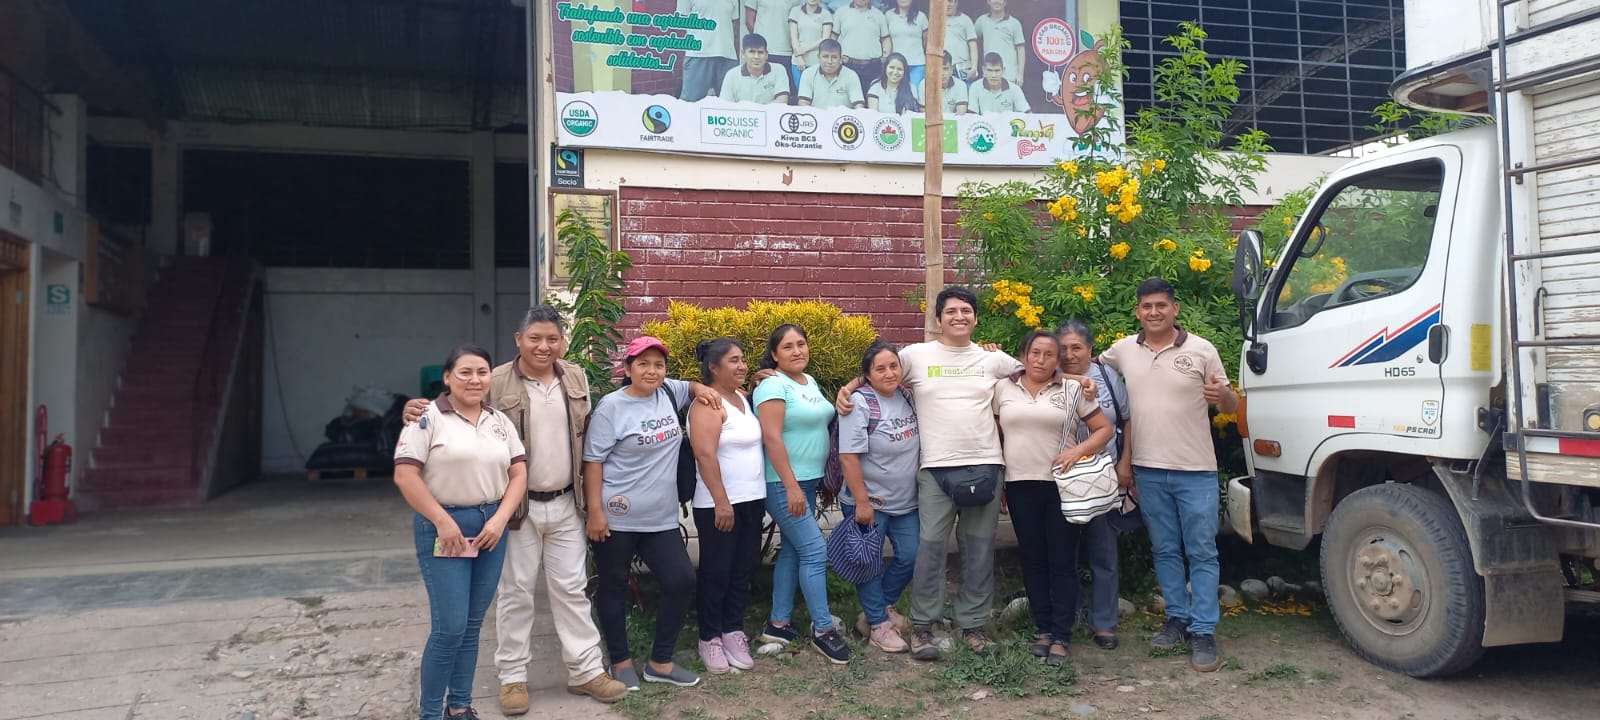 Root Capital's Junior Loan Officer Brayam Quilca Román with cooperative members at the COAS cacao cooperative in Pangoa, Peru. Credit: Root Capital